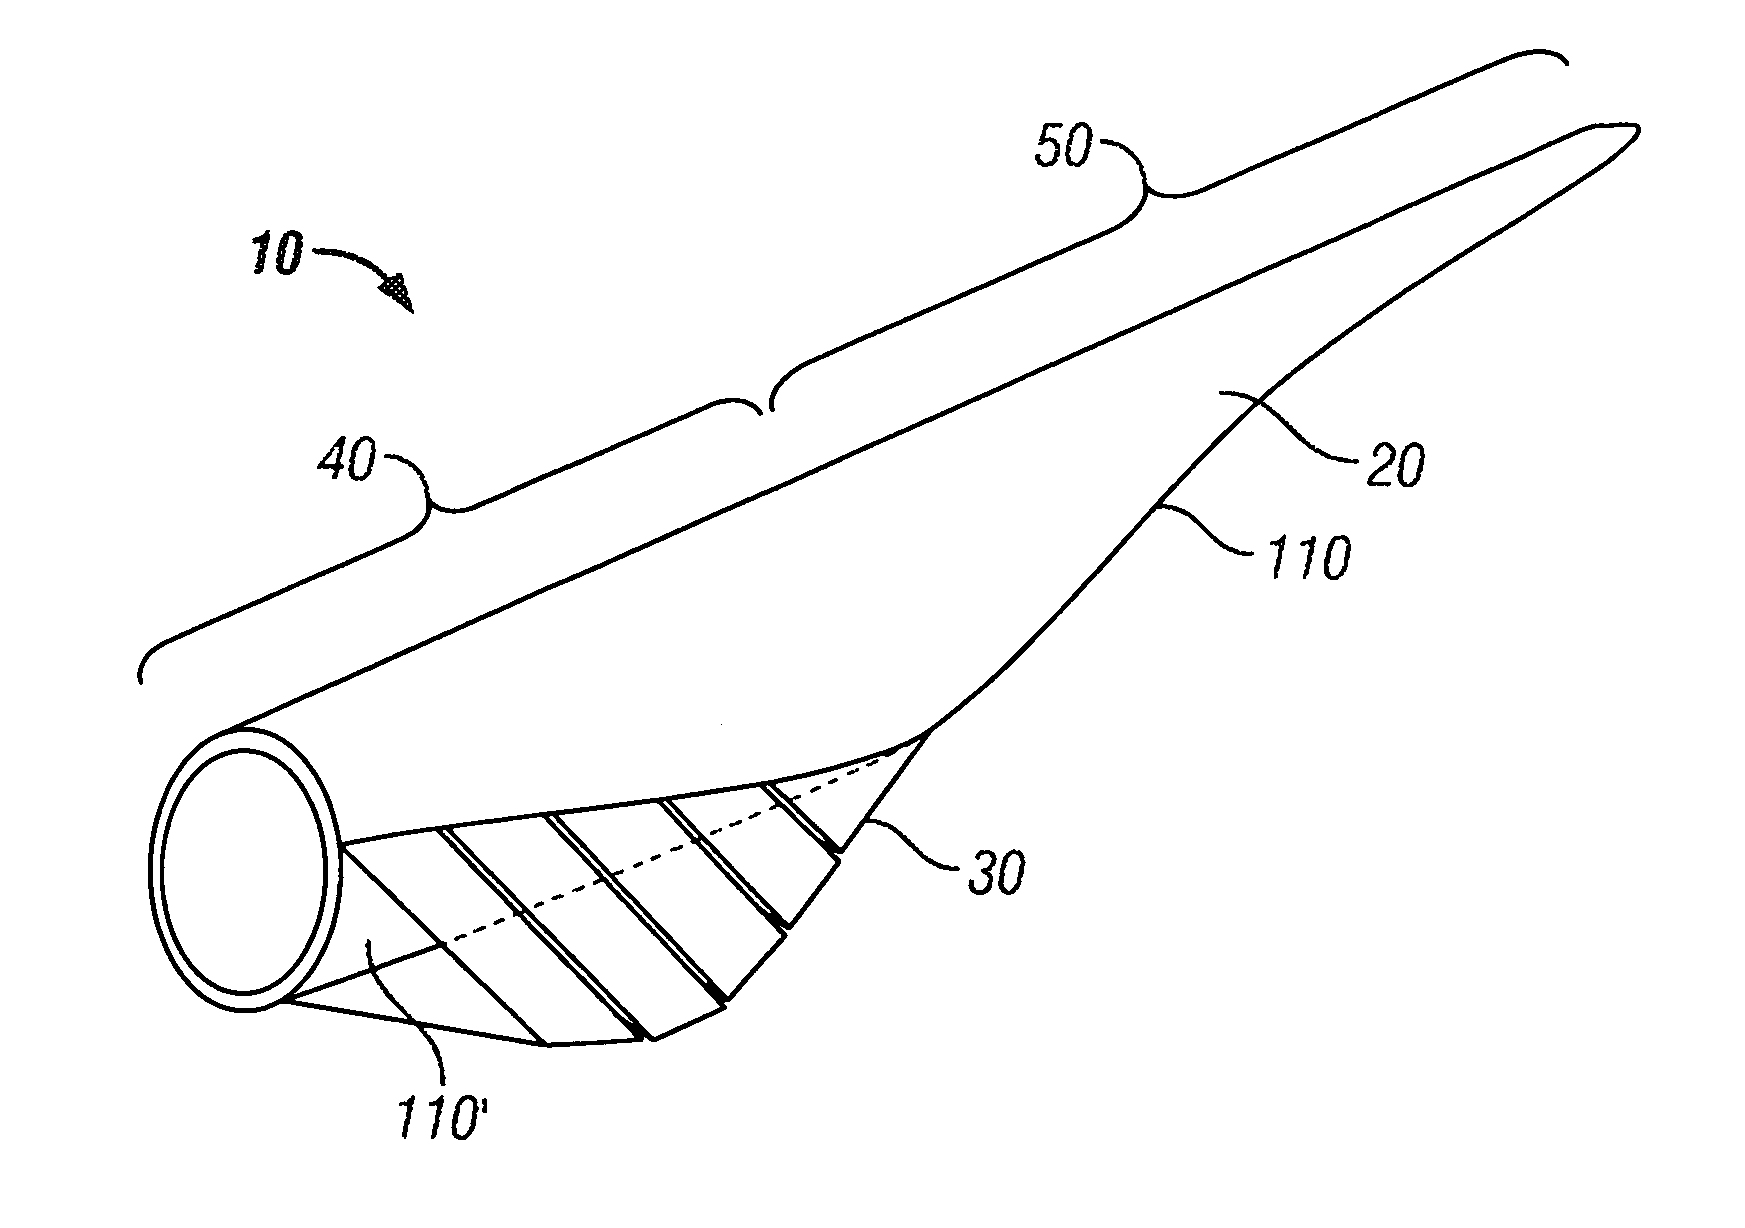 Segmented rotor blade extension portion